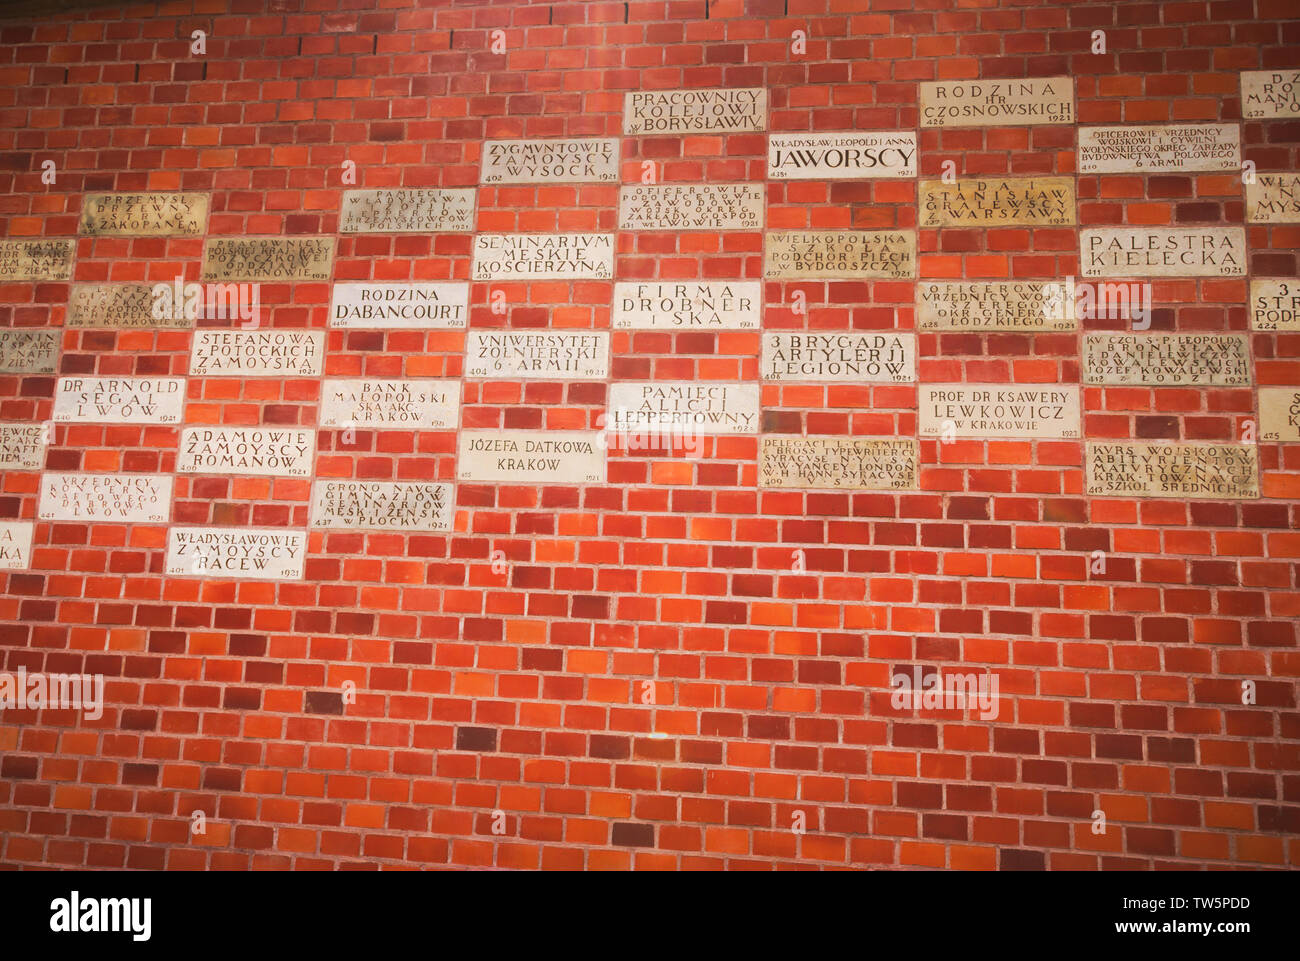 Commemorative sponsored plaques buried in fortification wall at Wawel Hill castle in Krakow, Poland Stock Photo